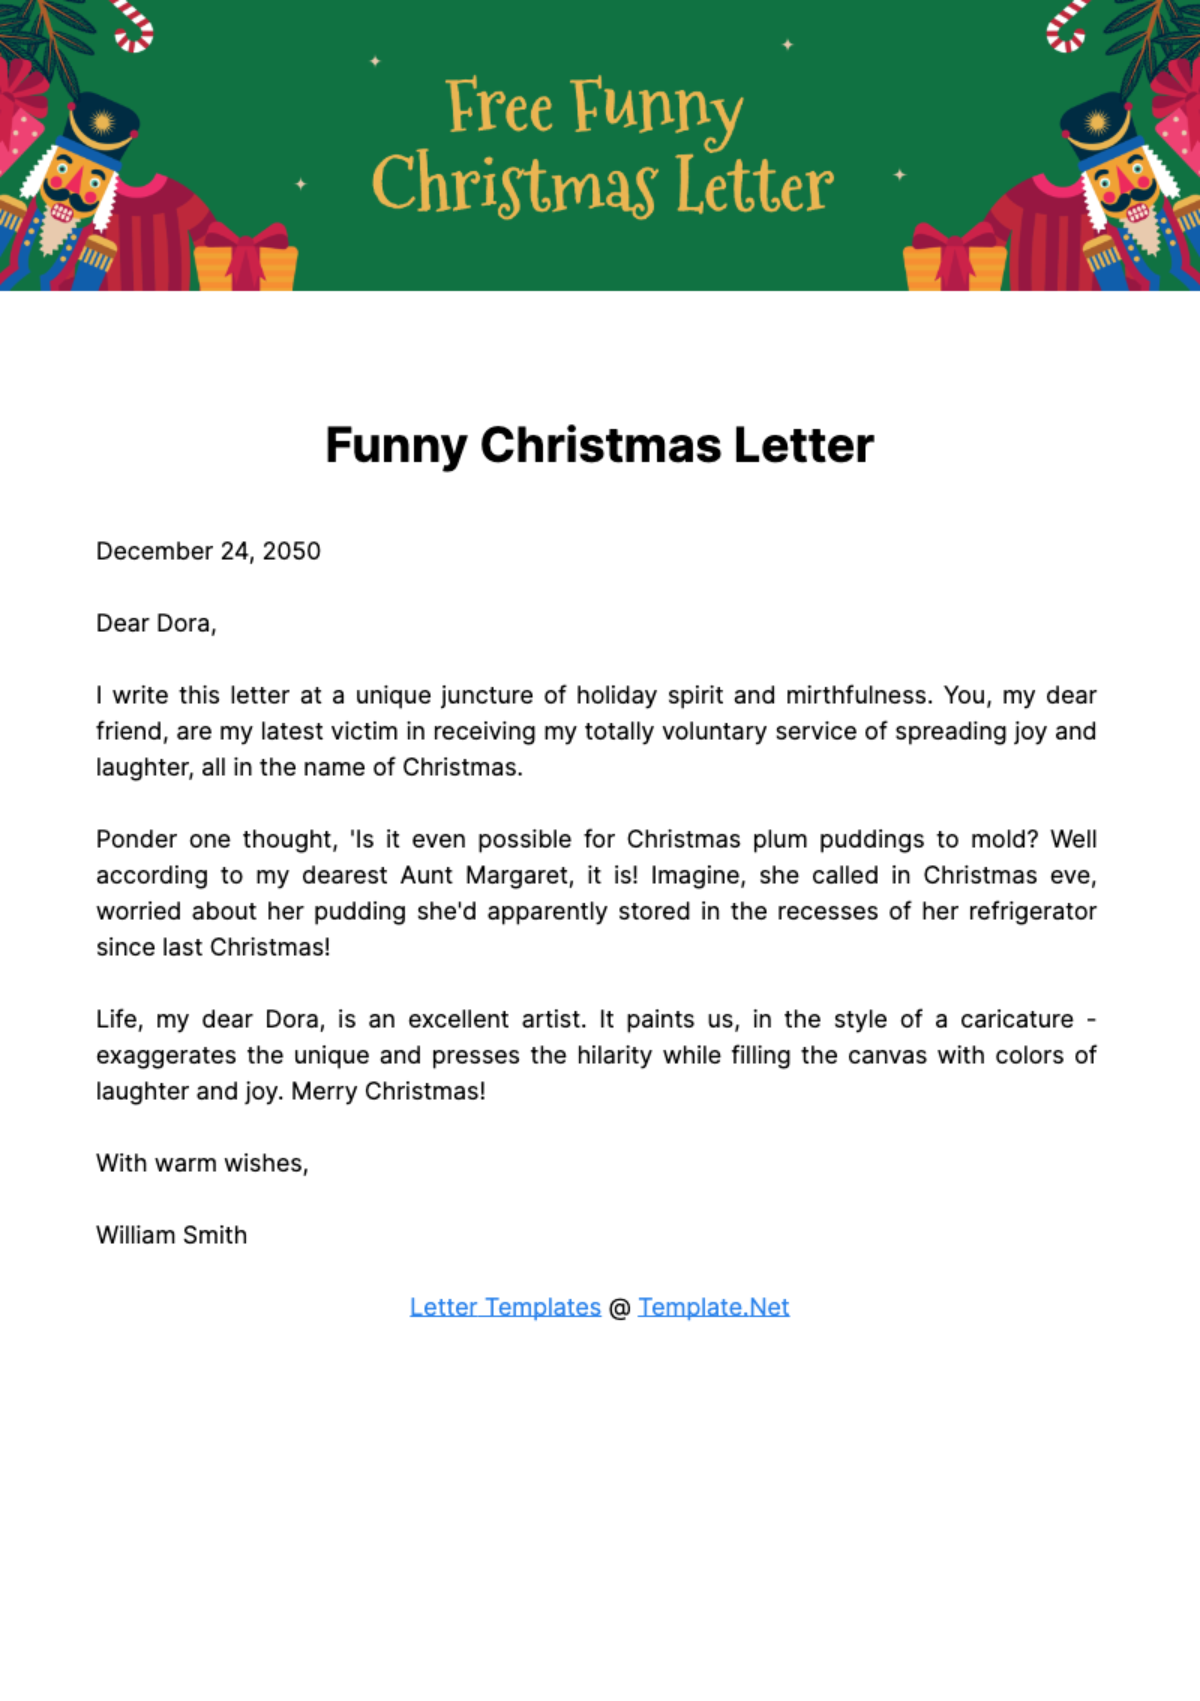 Free Funny Christmas Letter Template